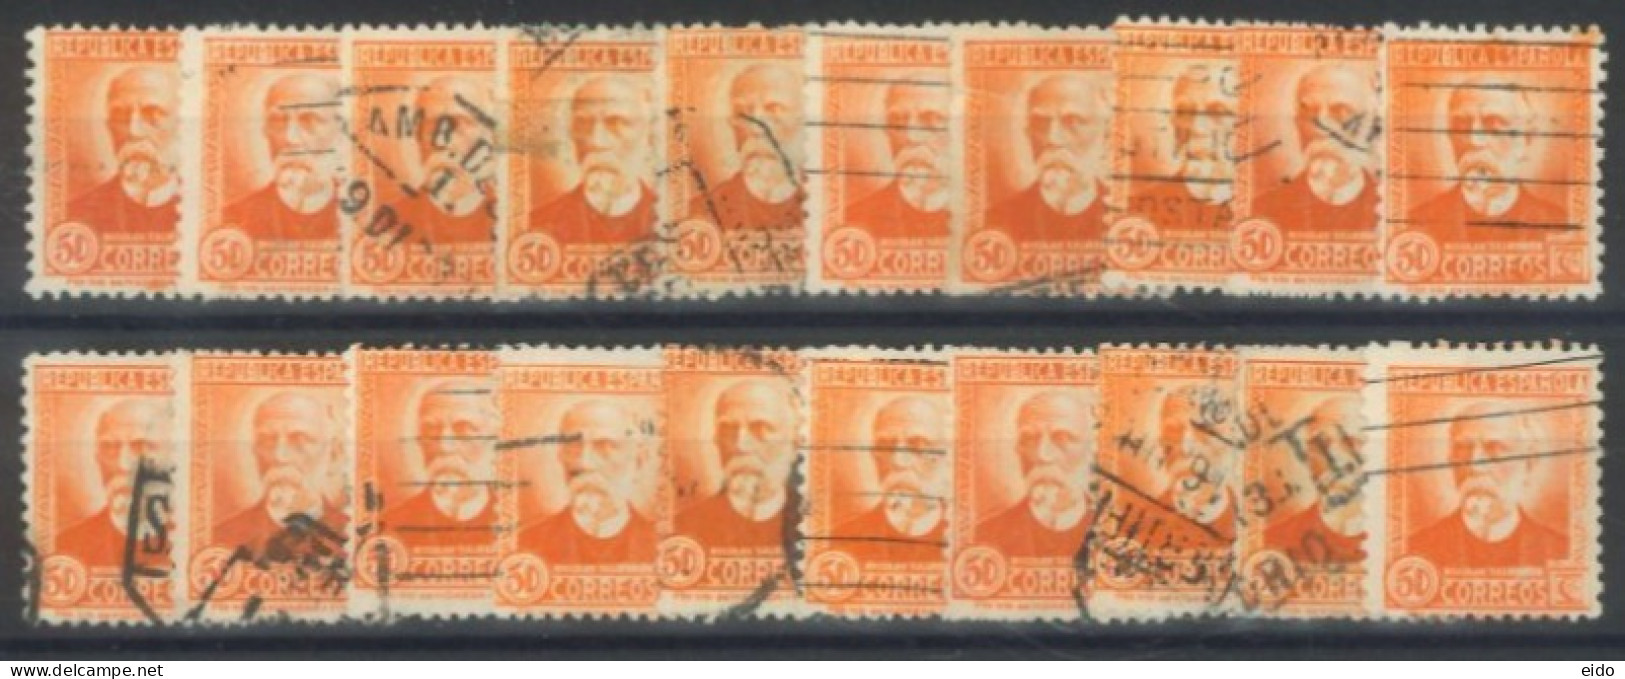 SPAIN, 1931/32, NICOLAS SALMERON STAMP W/O CONTROL NUMBER AT BACK QTY. 20, DISCOUNTED (SPECIAL PRICE) # 523a USED. - Gebraucht